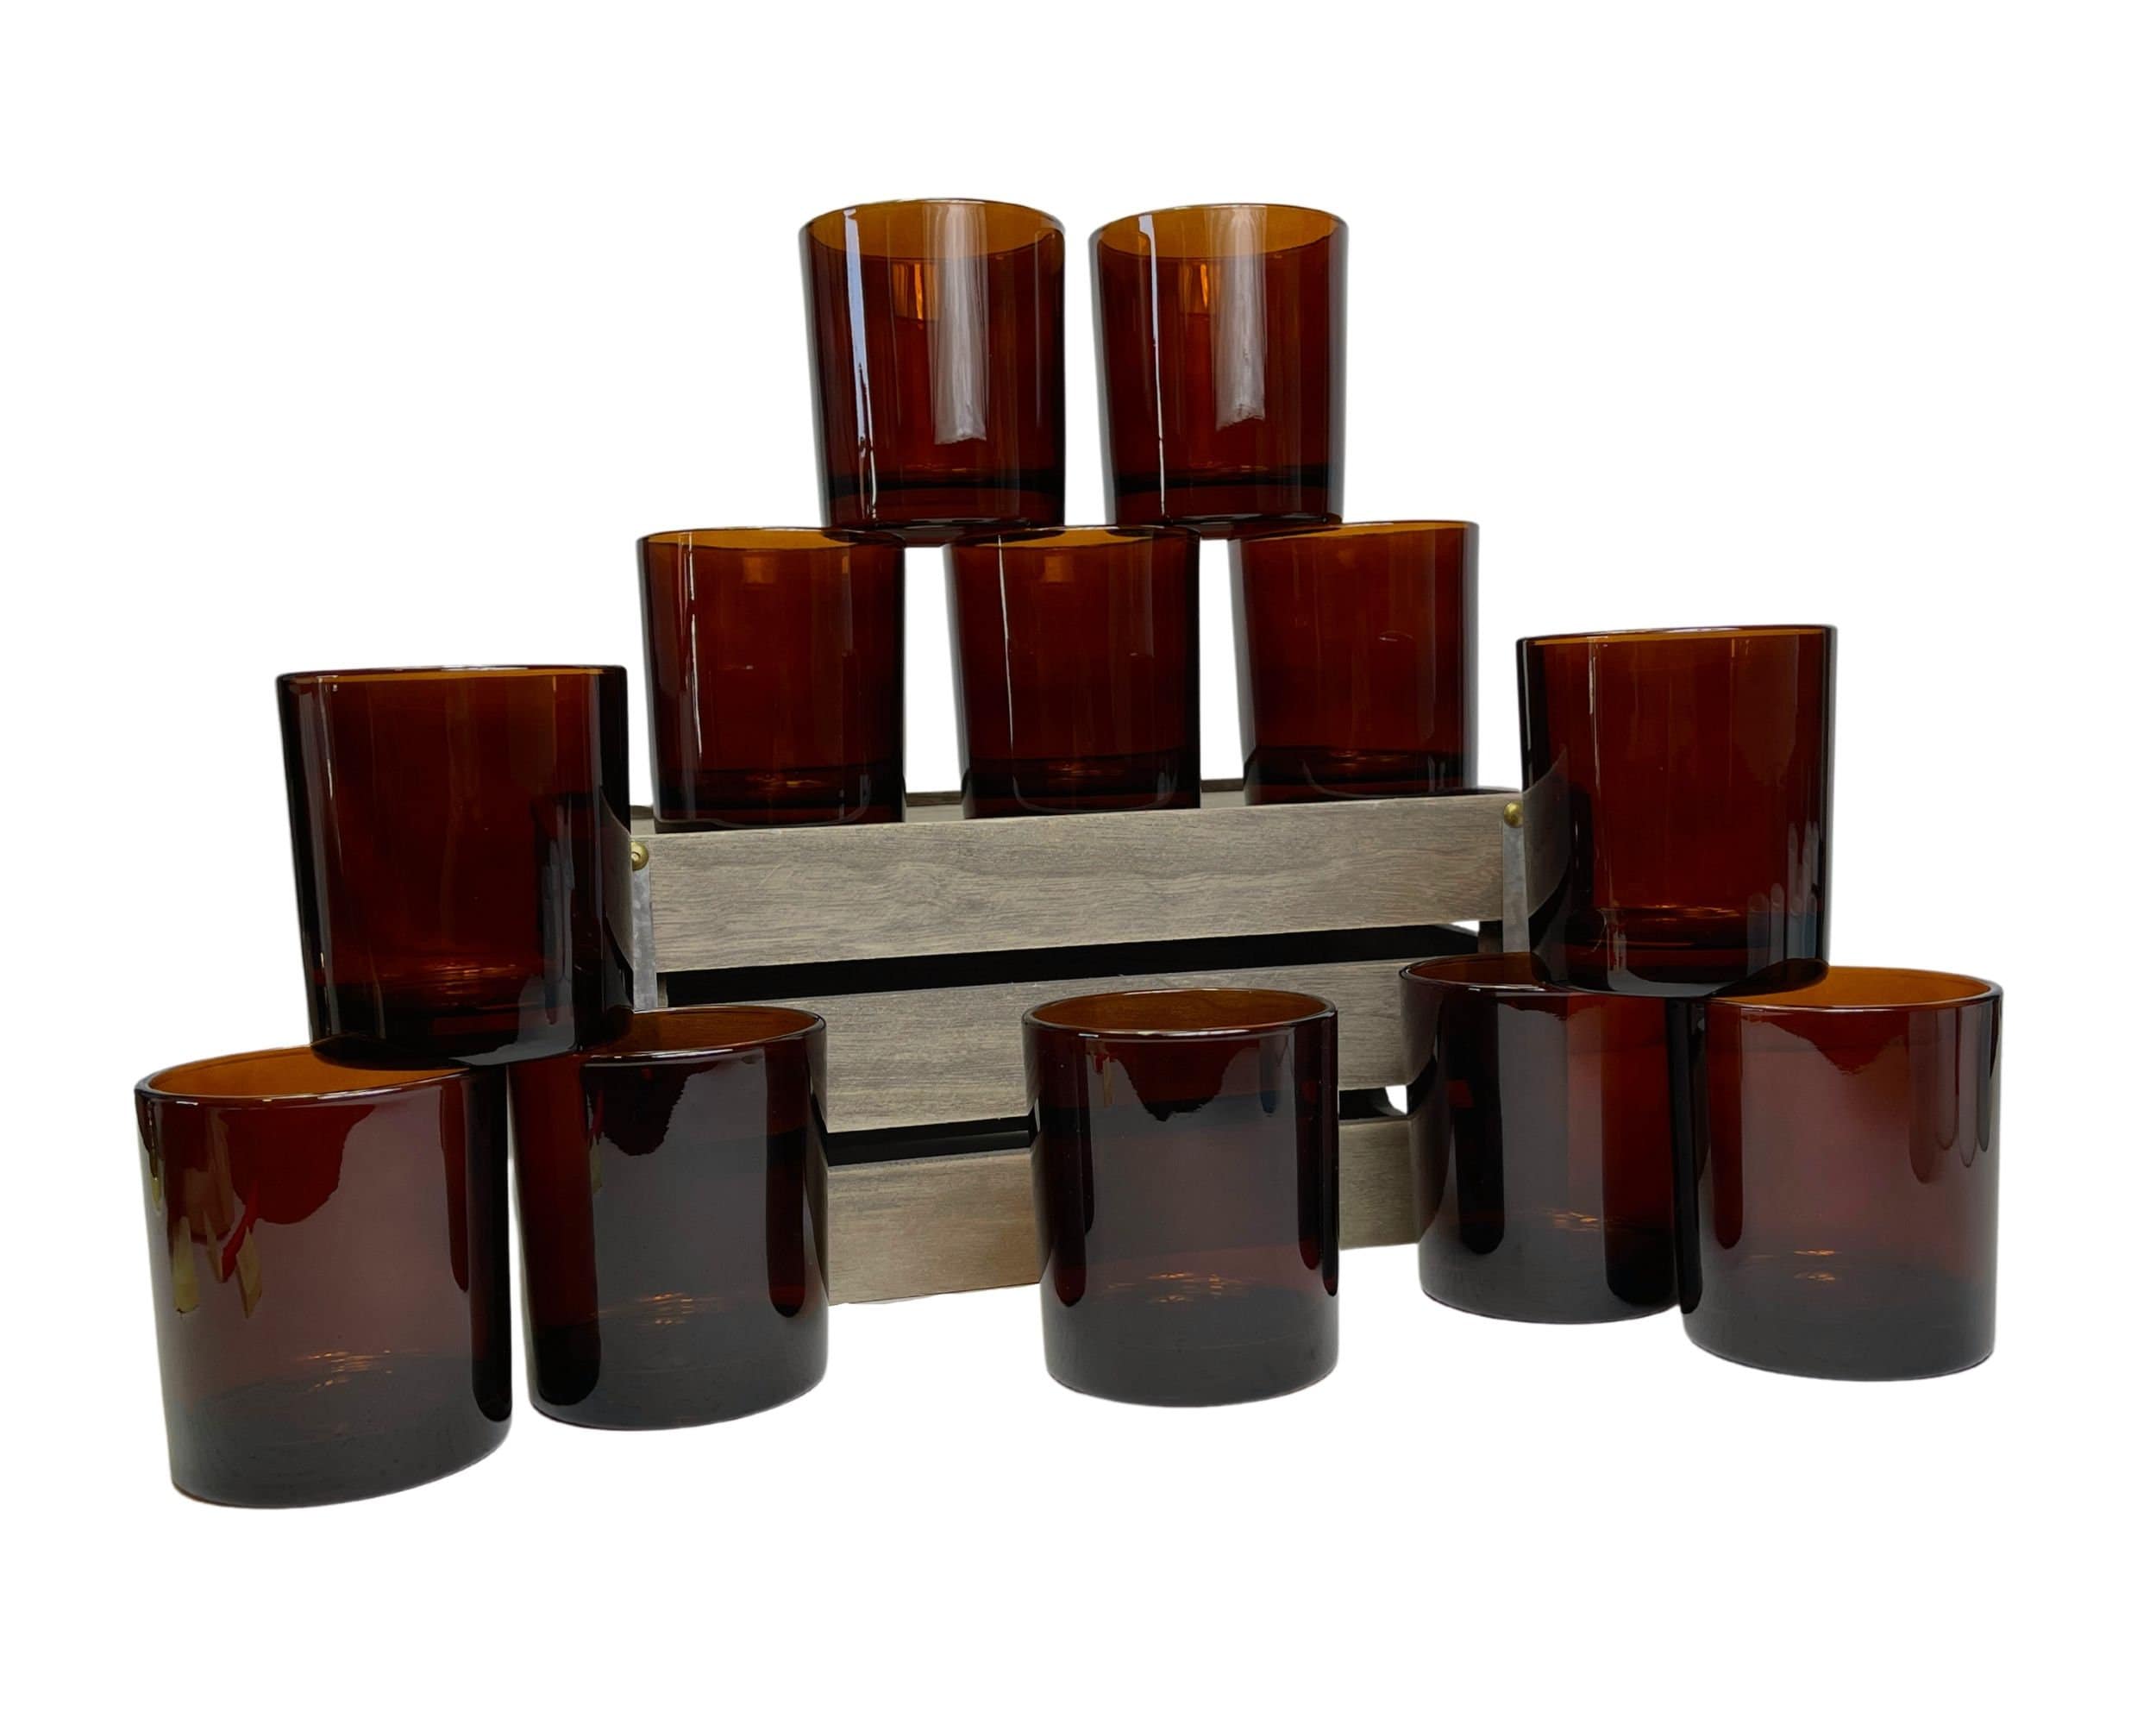  15 Pack, Candle Jars，12 OZ Empty Amber Glass Vessels